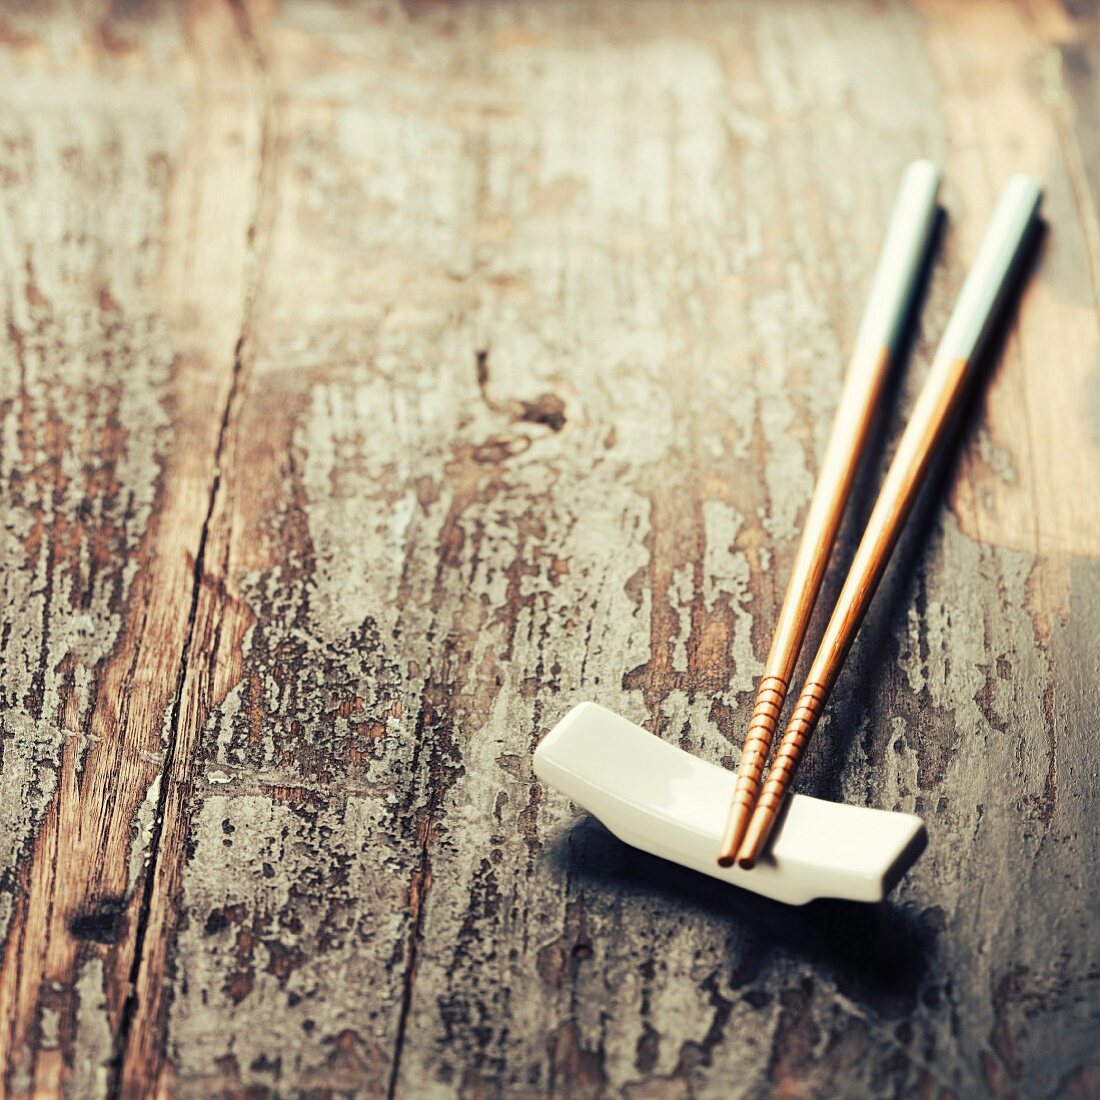 Pair of chopsticks on rustic wooden background